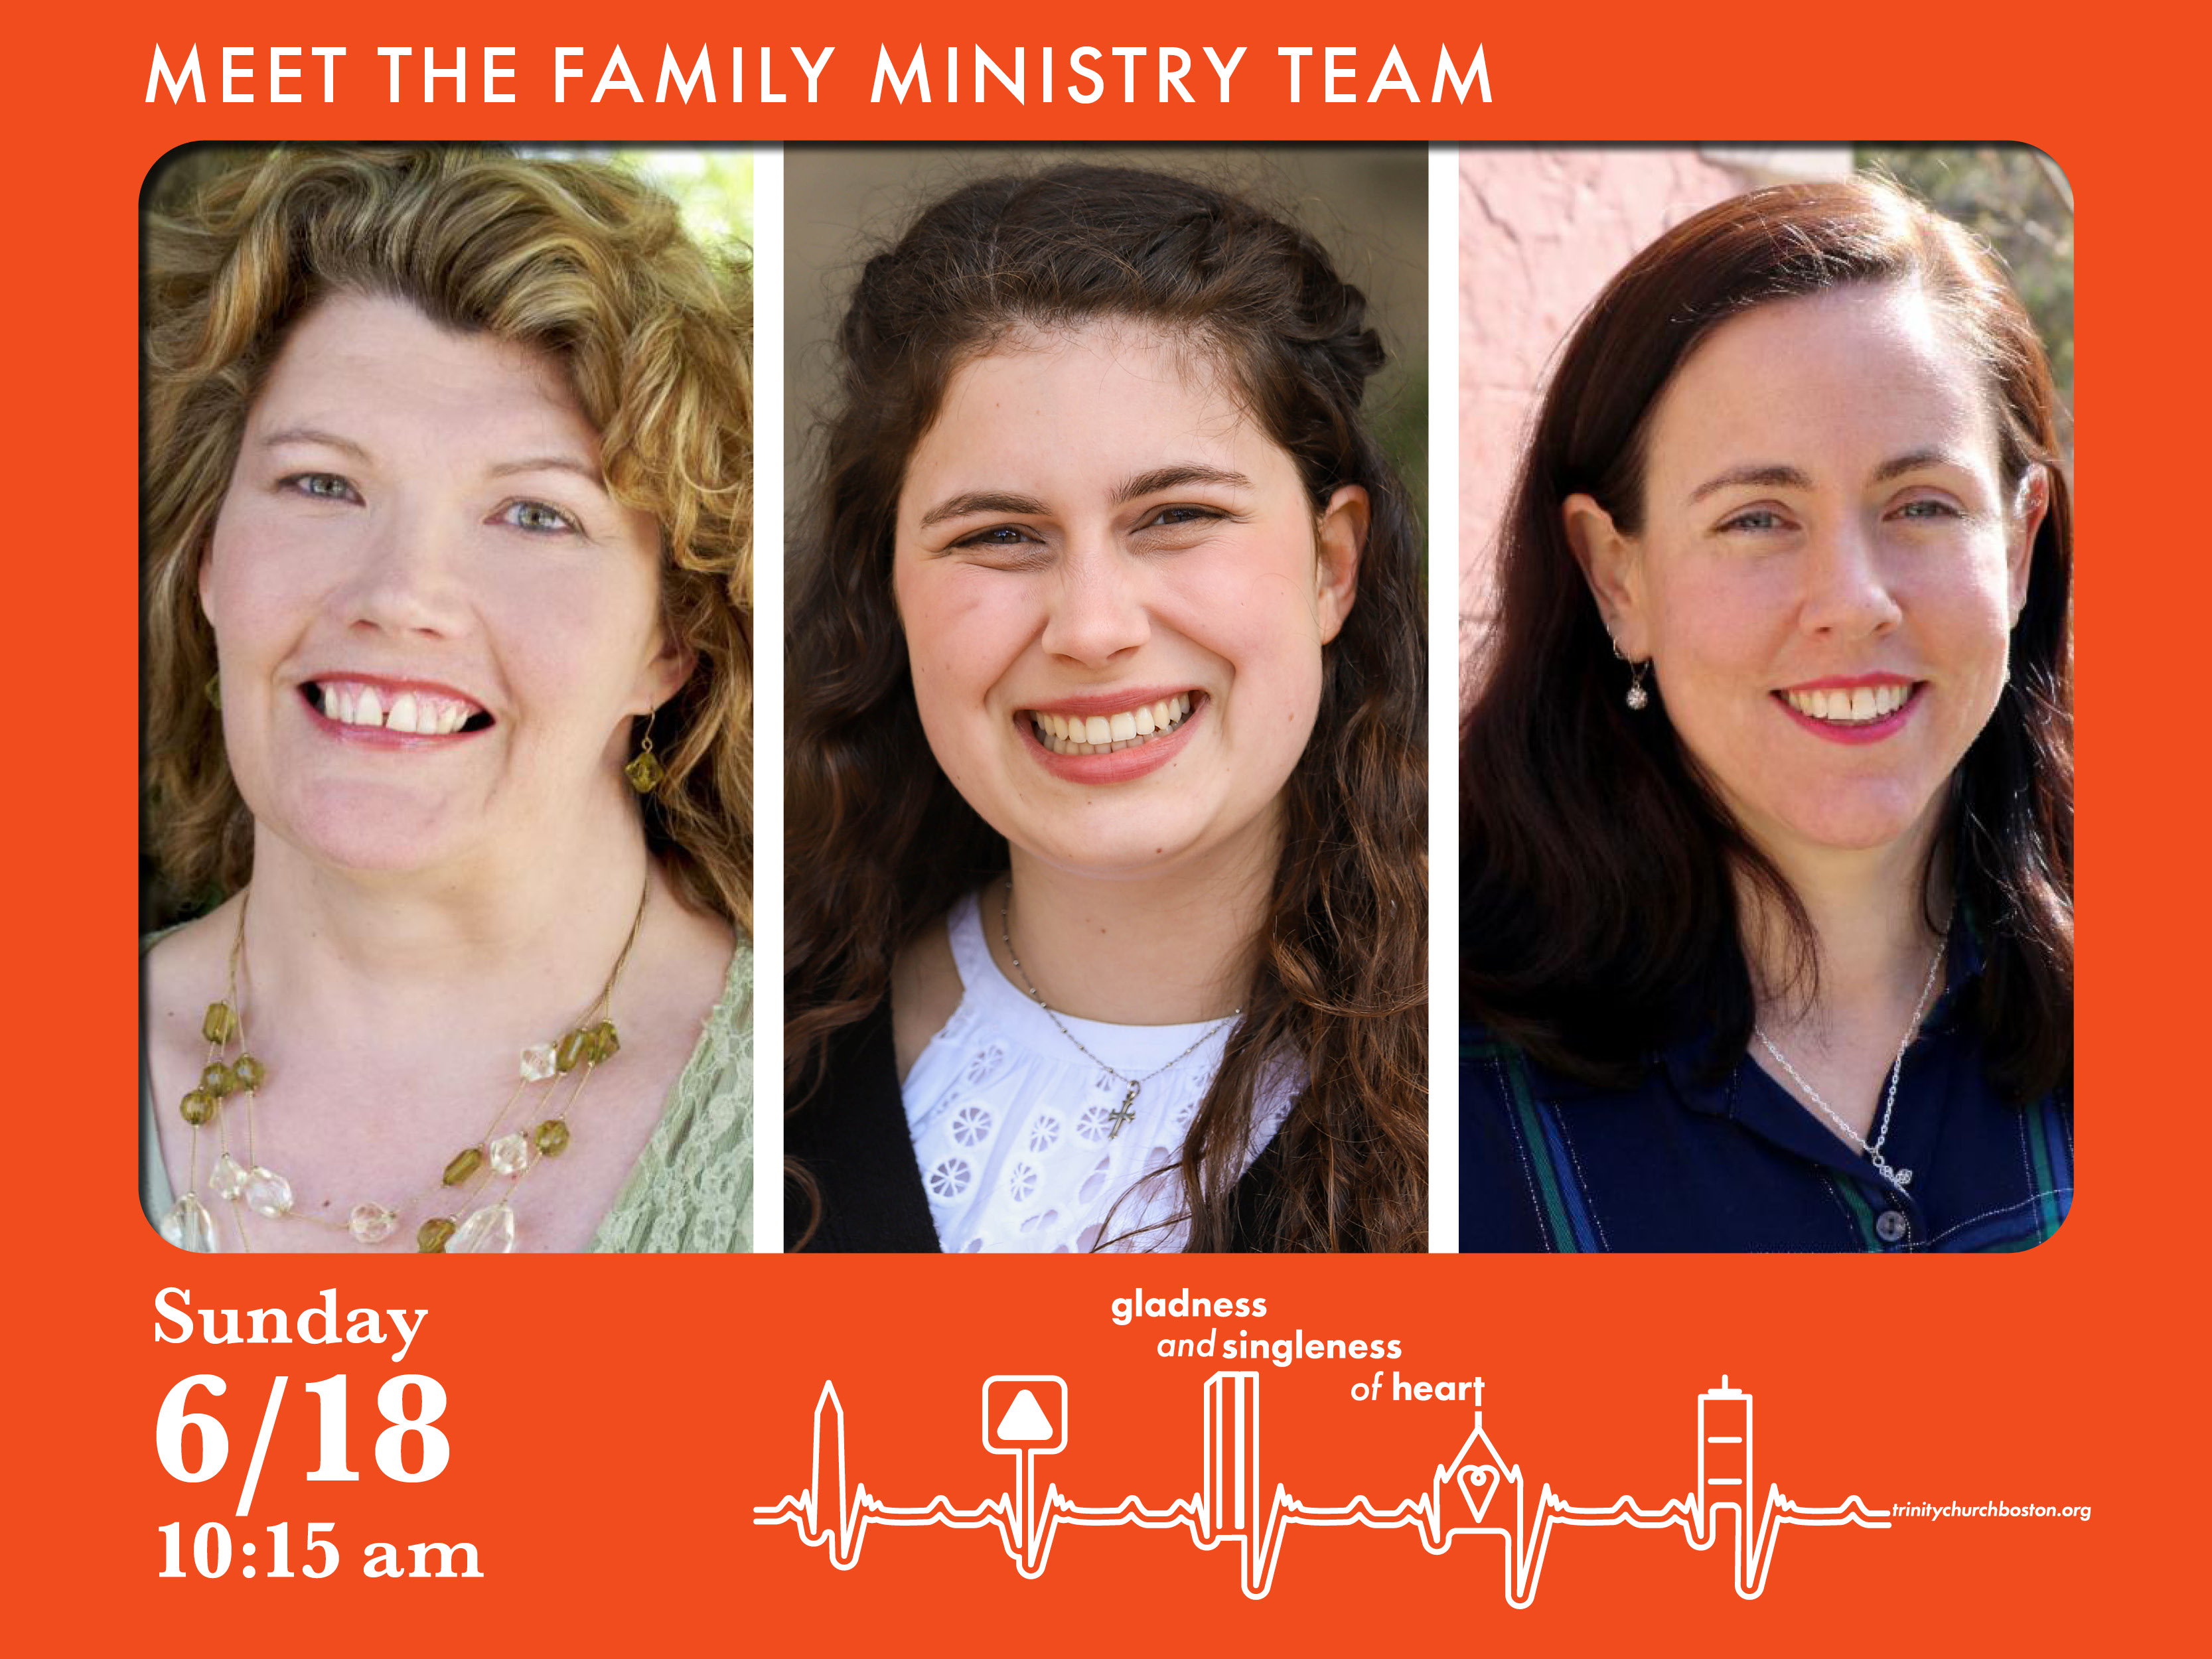 Meet the Family Ministry Team • Sunday, 6/18, at 10:15 am